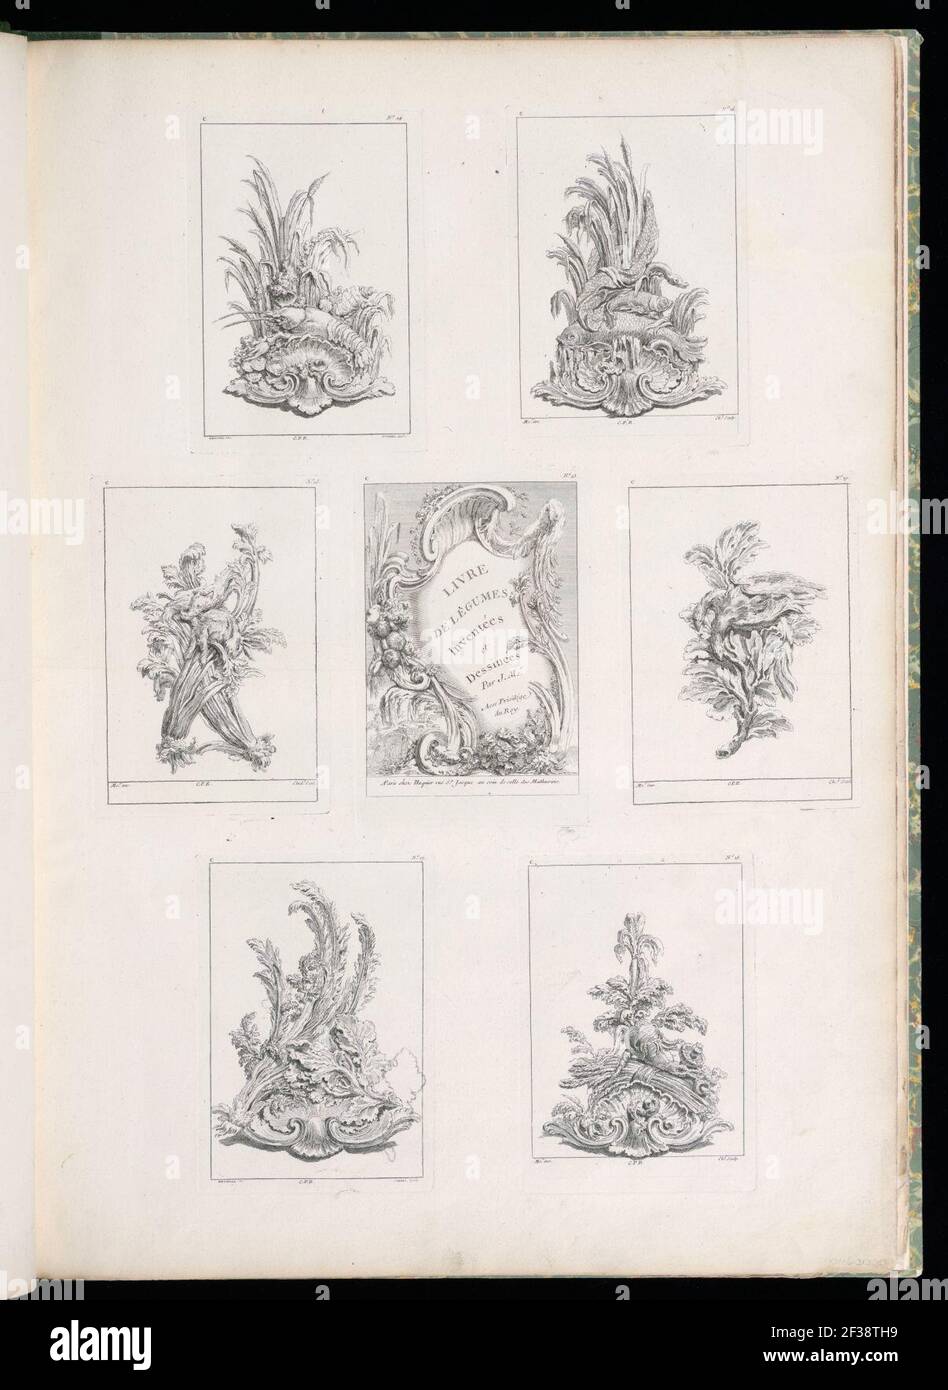 Print, Ornament Design with Wheat and Acanthus Leaves over Shell, from Livre des Legumes (Series of Vegetable Ornament), pl. 17 in Oeuvre de Juste-Aurèle Meissonnier, 1748 Stock Photo